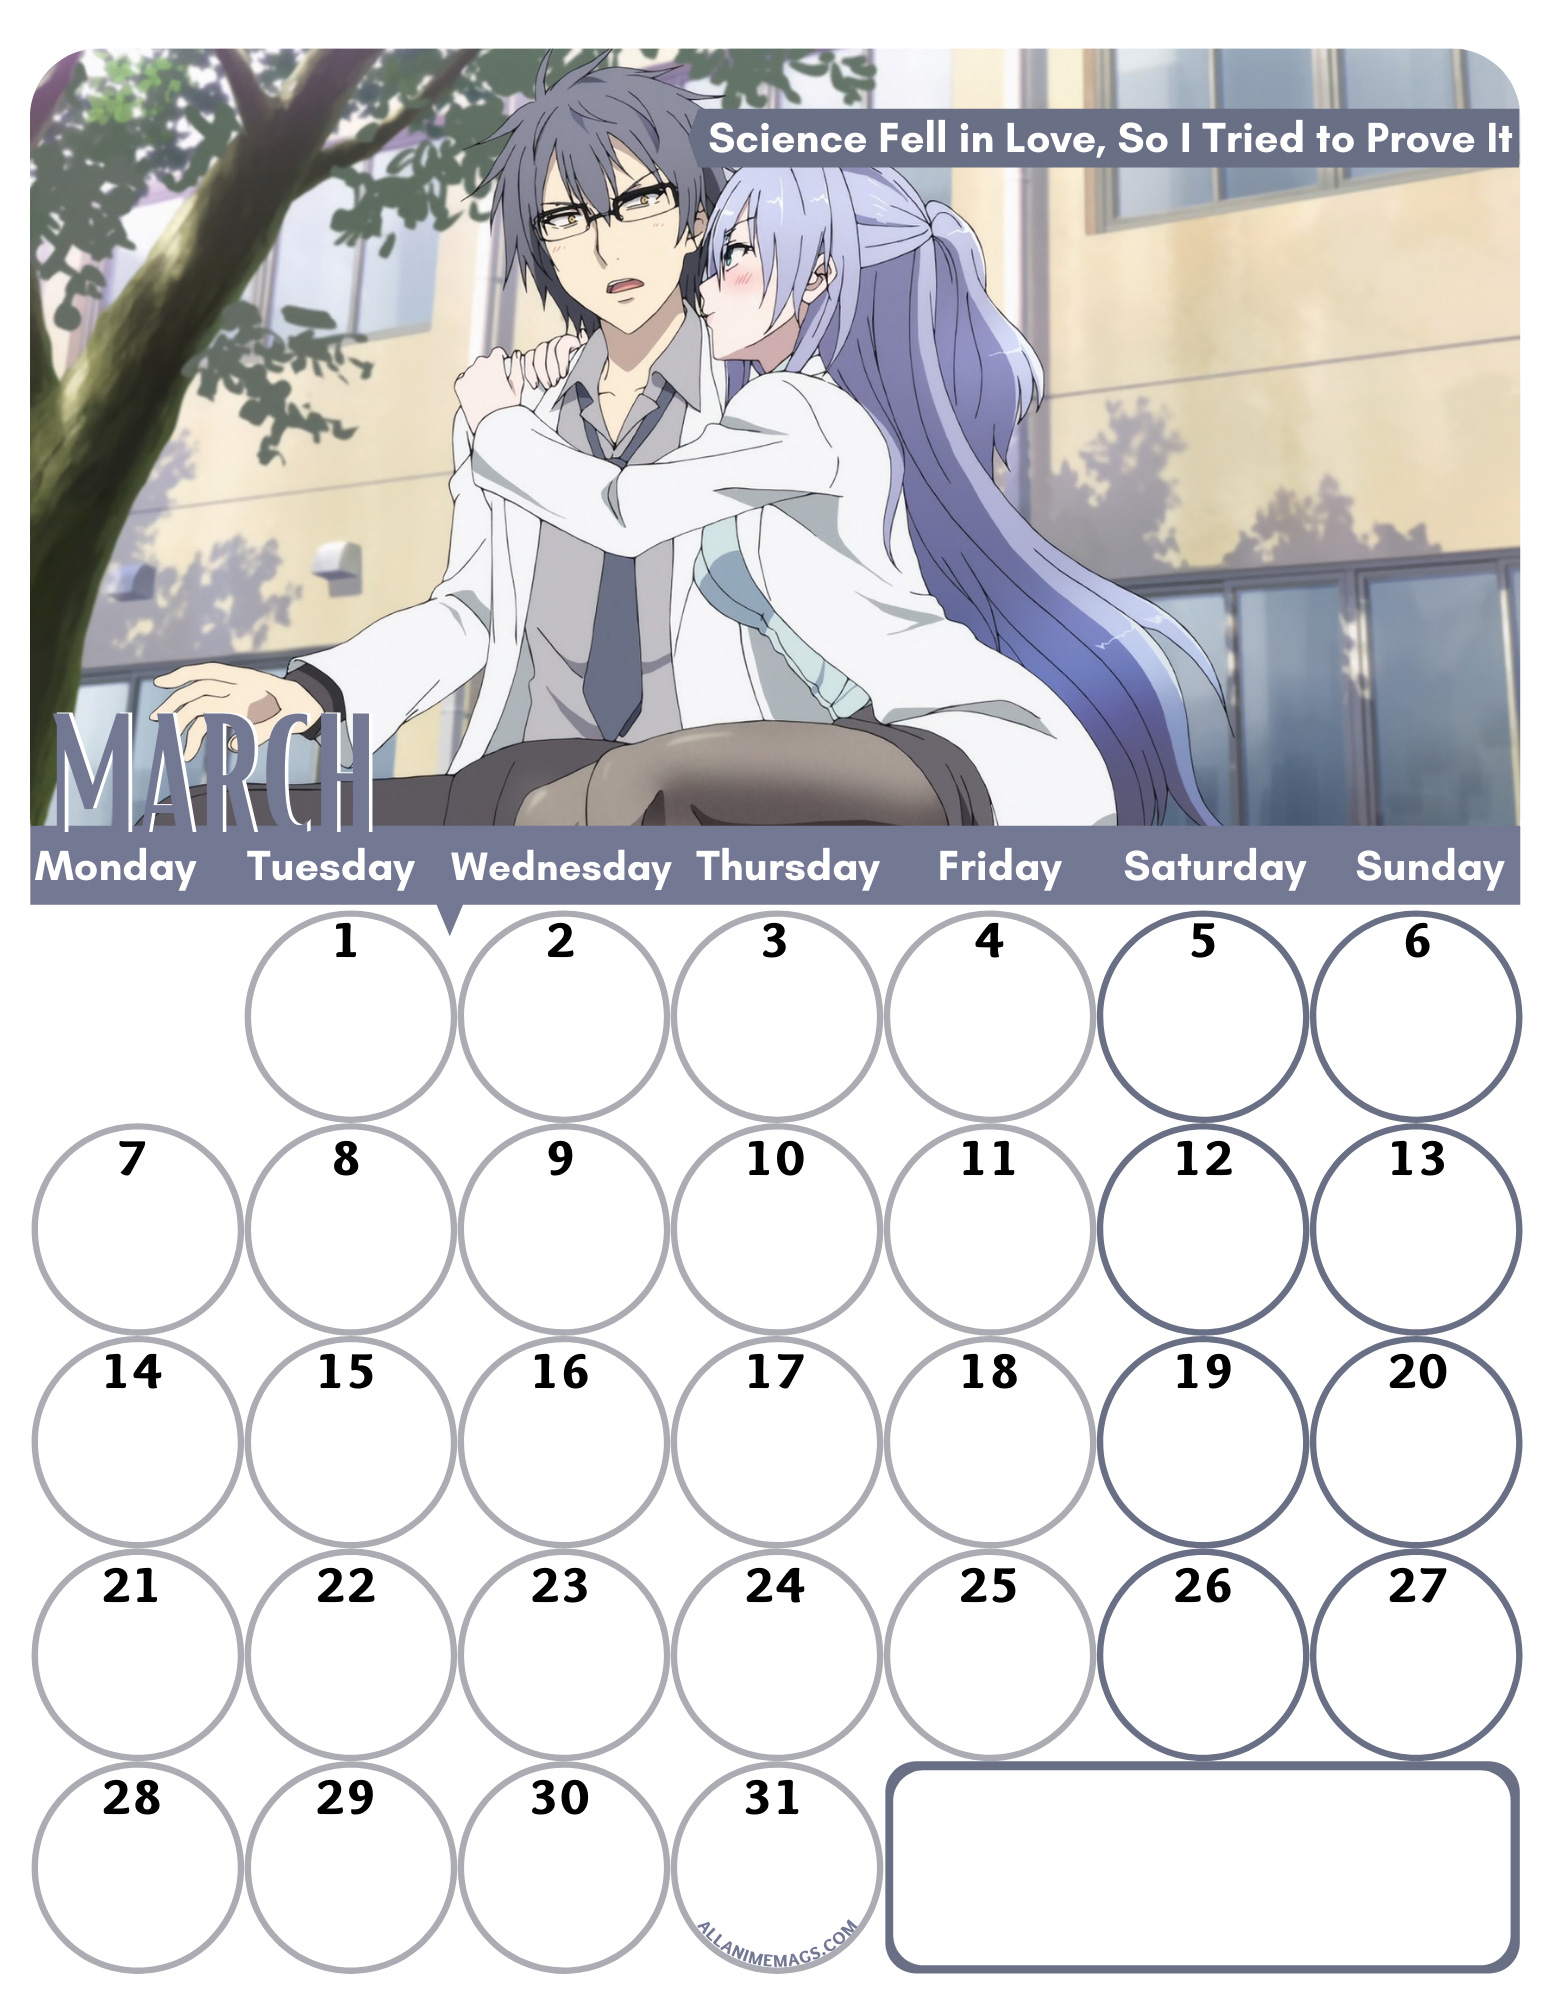 03-March-Free-Romance-Anime-Wall-Calendar-2022-AllAnimeMag-Science-Fell-in-Love,-So-I-Tried-to-Prove-It